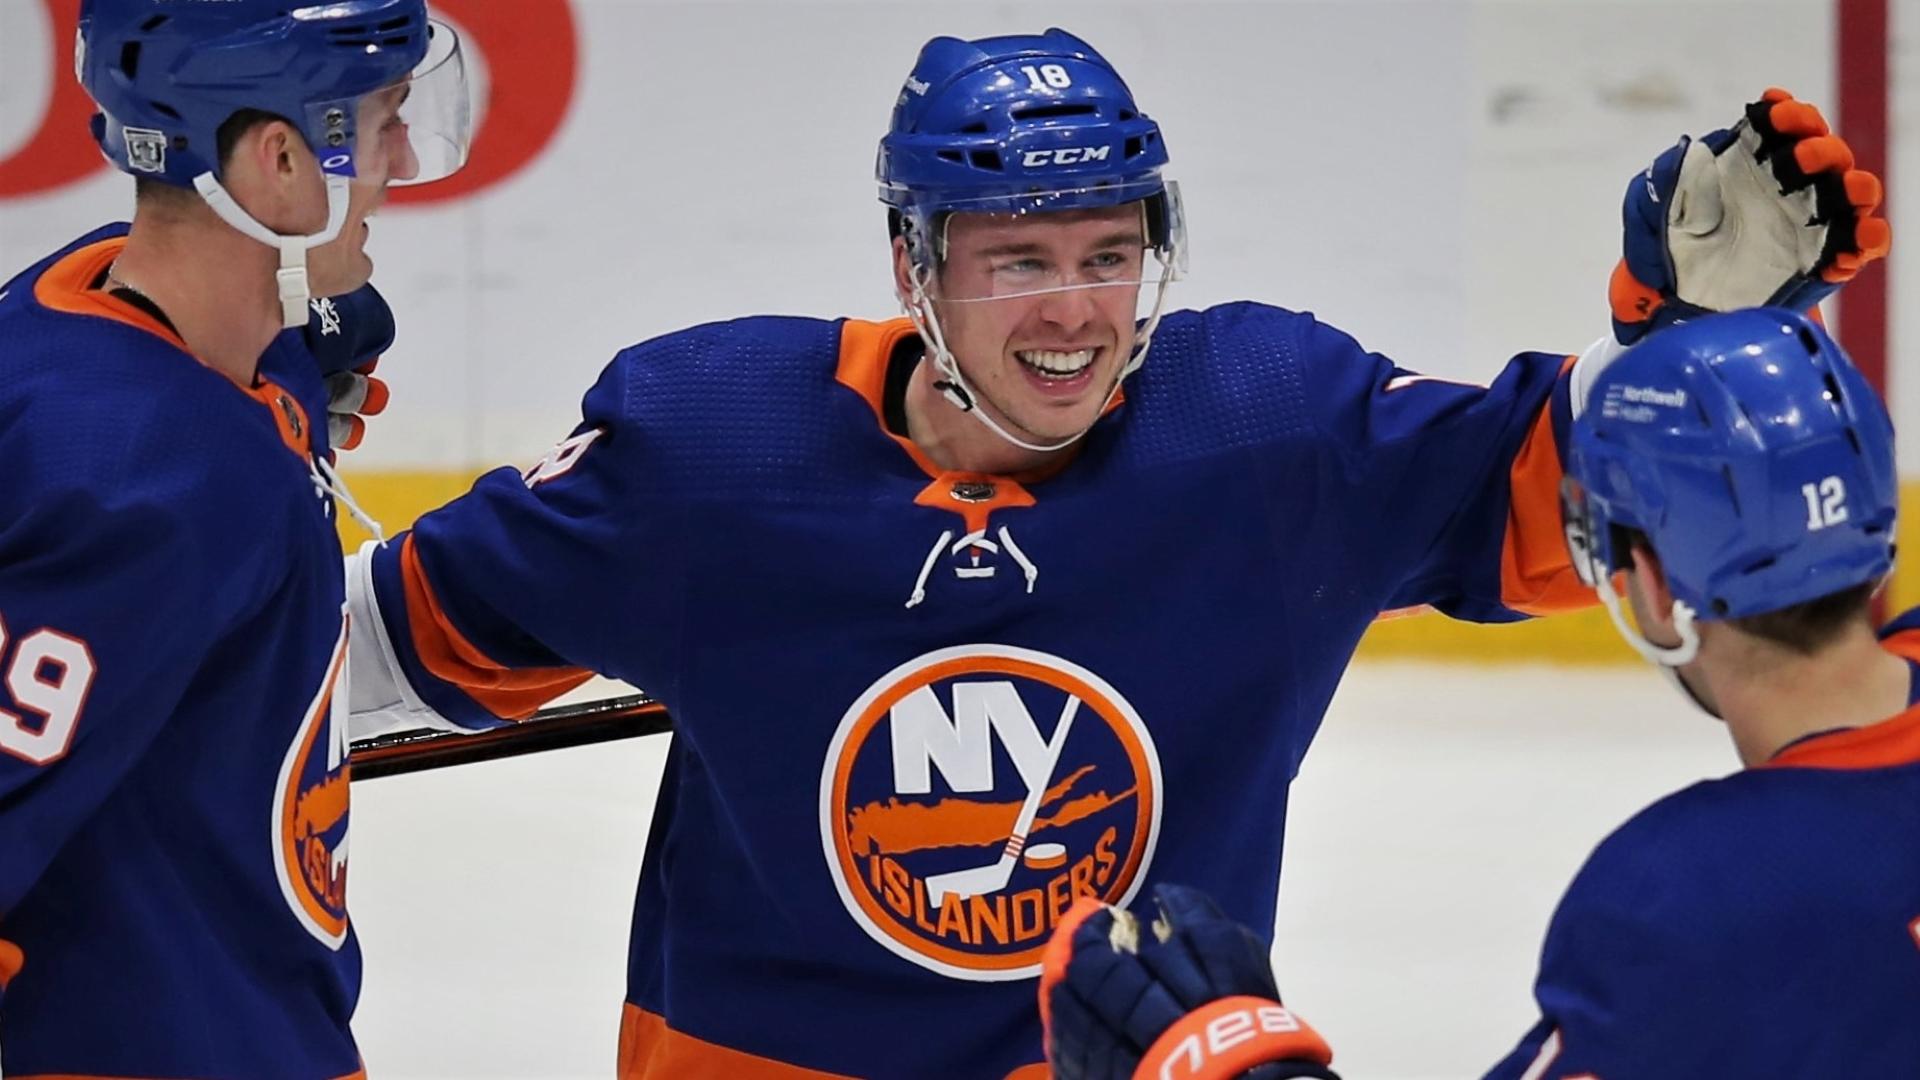 Feb 25, 2021; Uniondale, New York, USA; New York Islanders left wing Anthony Beauvillier (18) celebrates his goal against the Boston Bruins with centers Brock Nelson (29) and Josh Bailey (12) and defenseman Andy Greene (4) during the third period at Nassau Veterans Memorial Coliseum. / Credit: Brad Penner-USA TODAY Sports